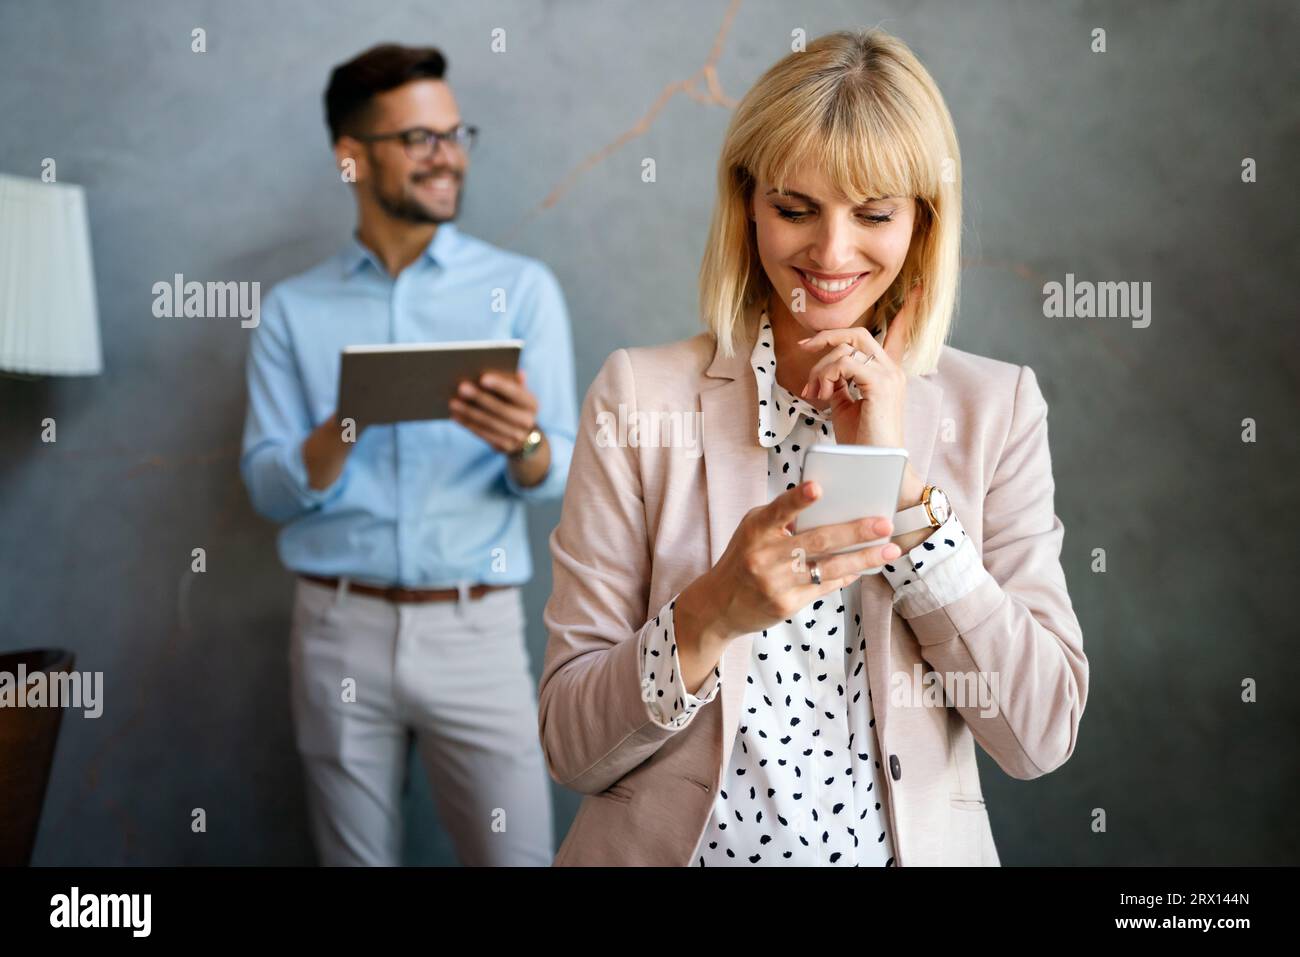 Business people work technology tablet online corporate teamwork concept. Stock Photo